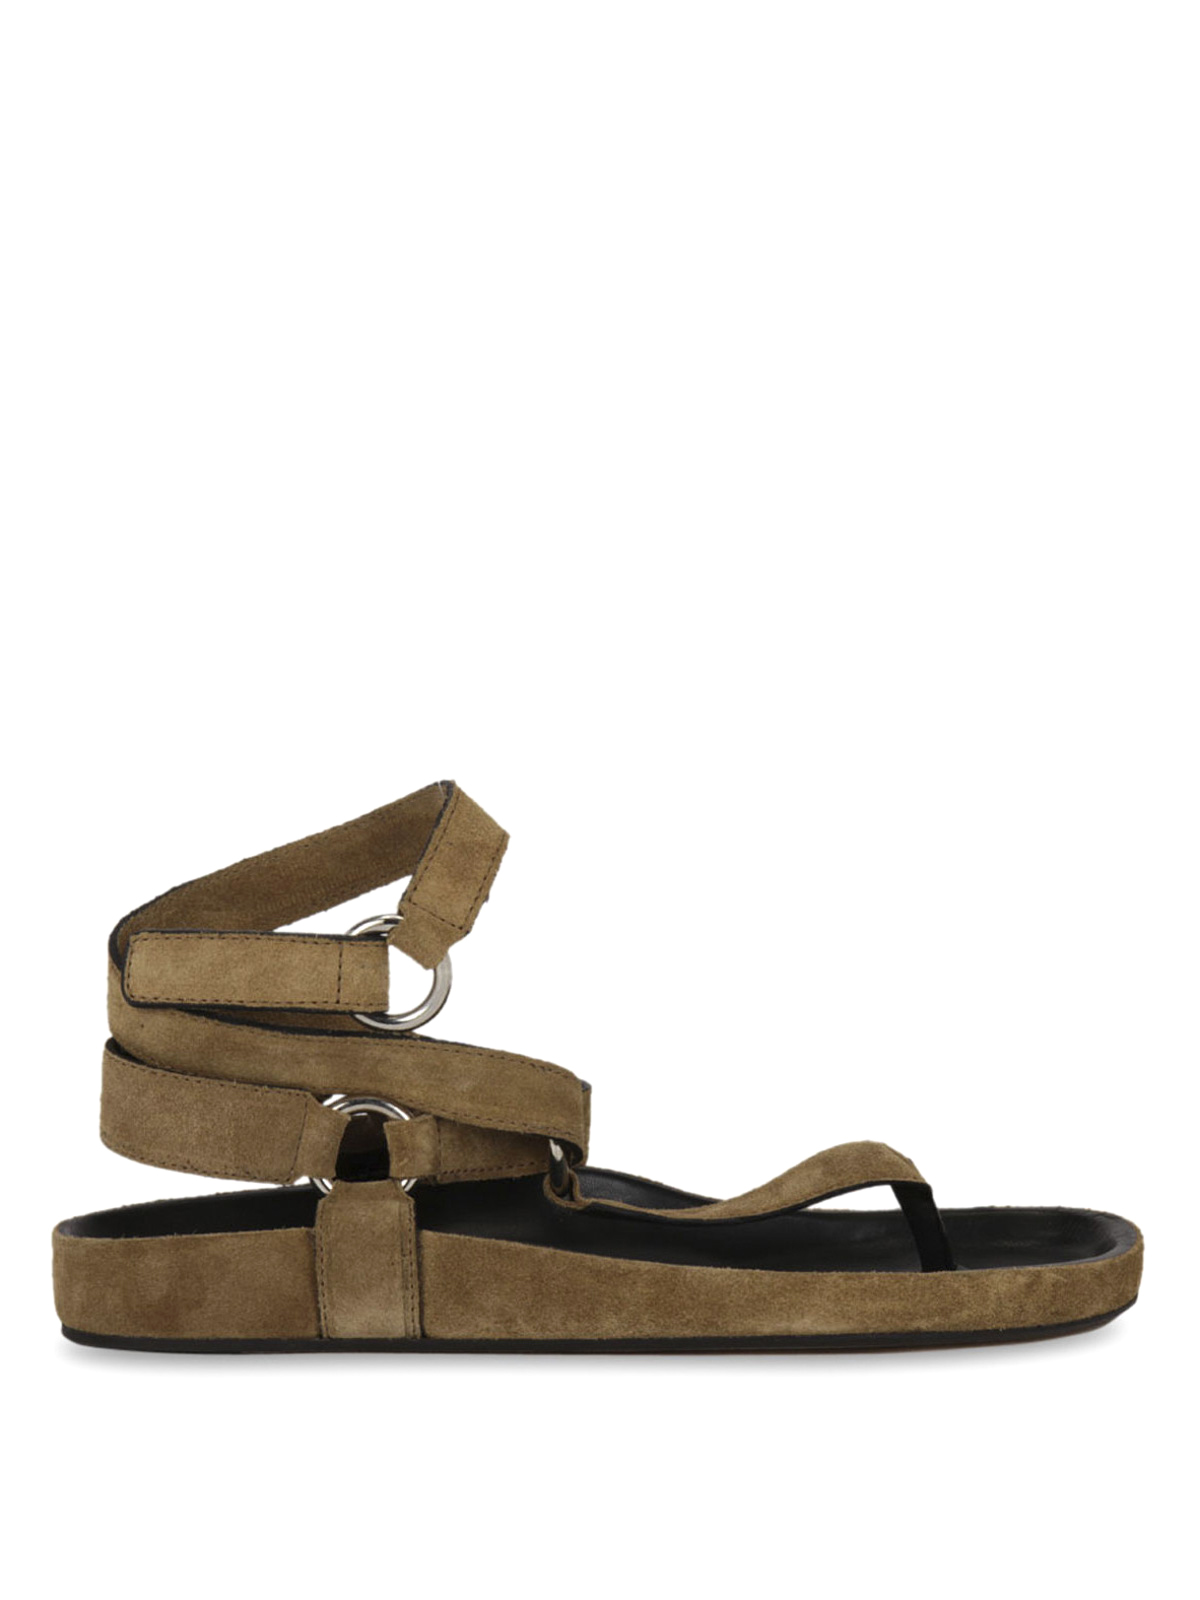 areal spray Frustration Sandals Isabel Marant Etoile - Loatis suede sandals - SD015817P018S50BW